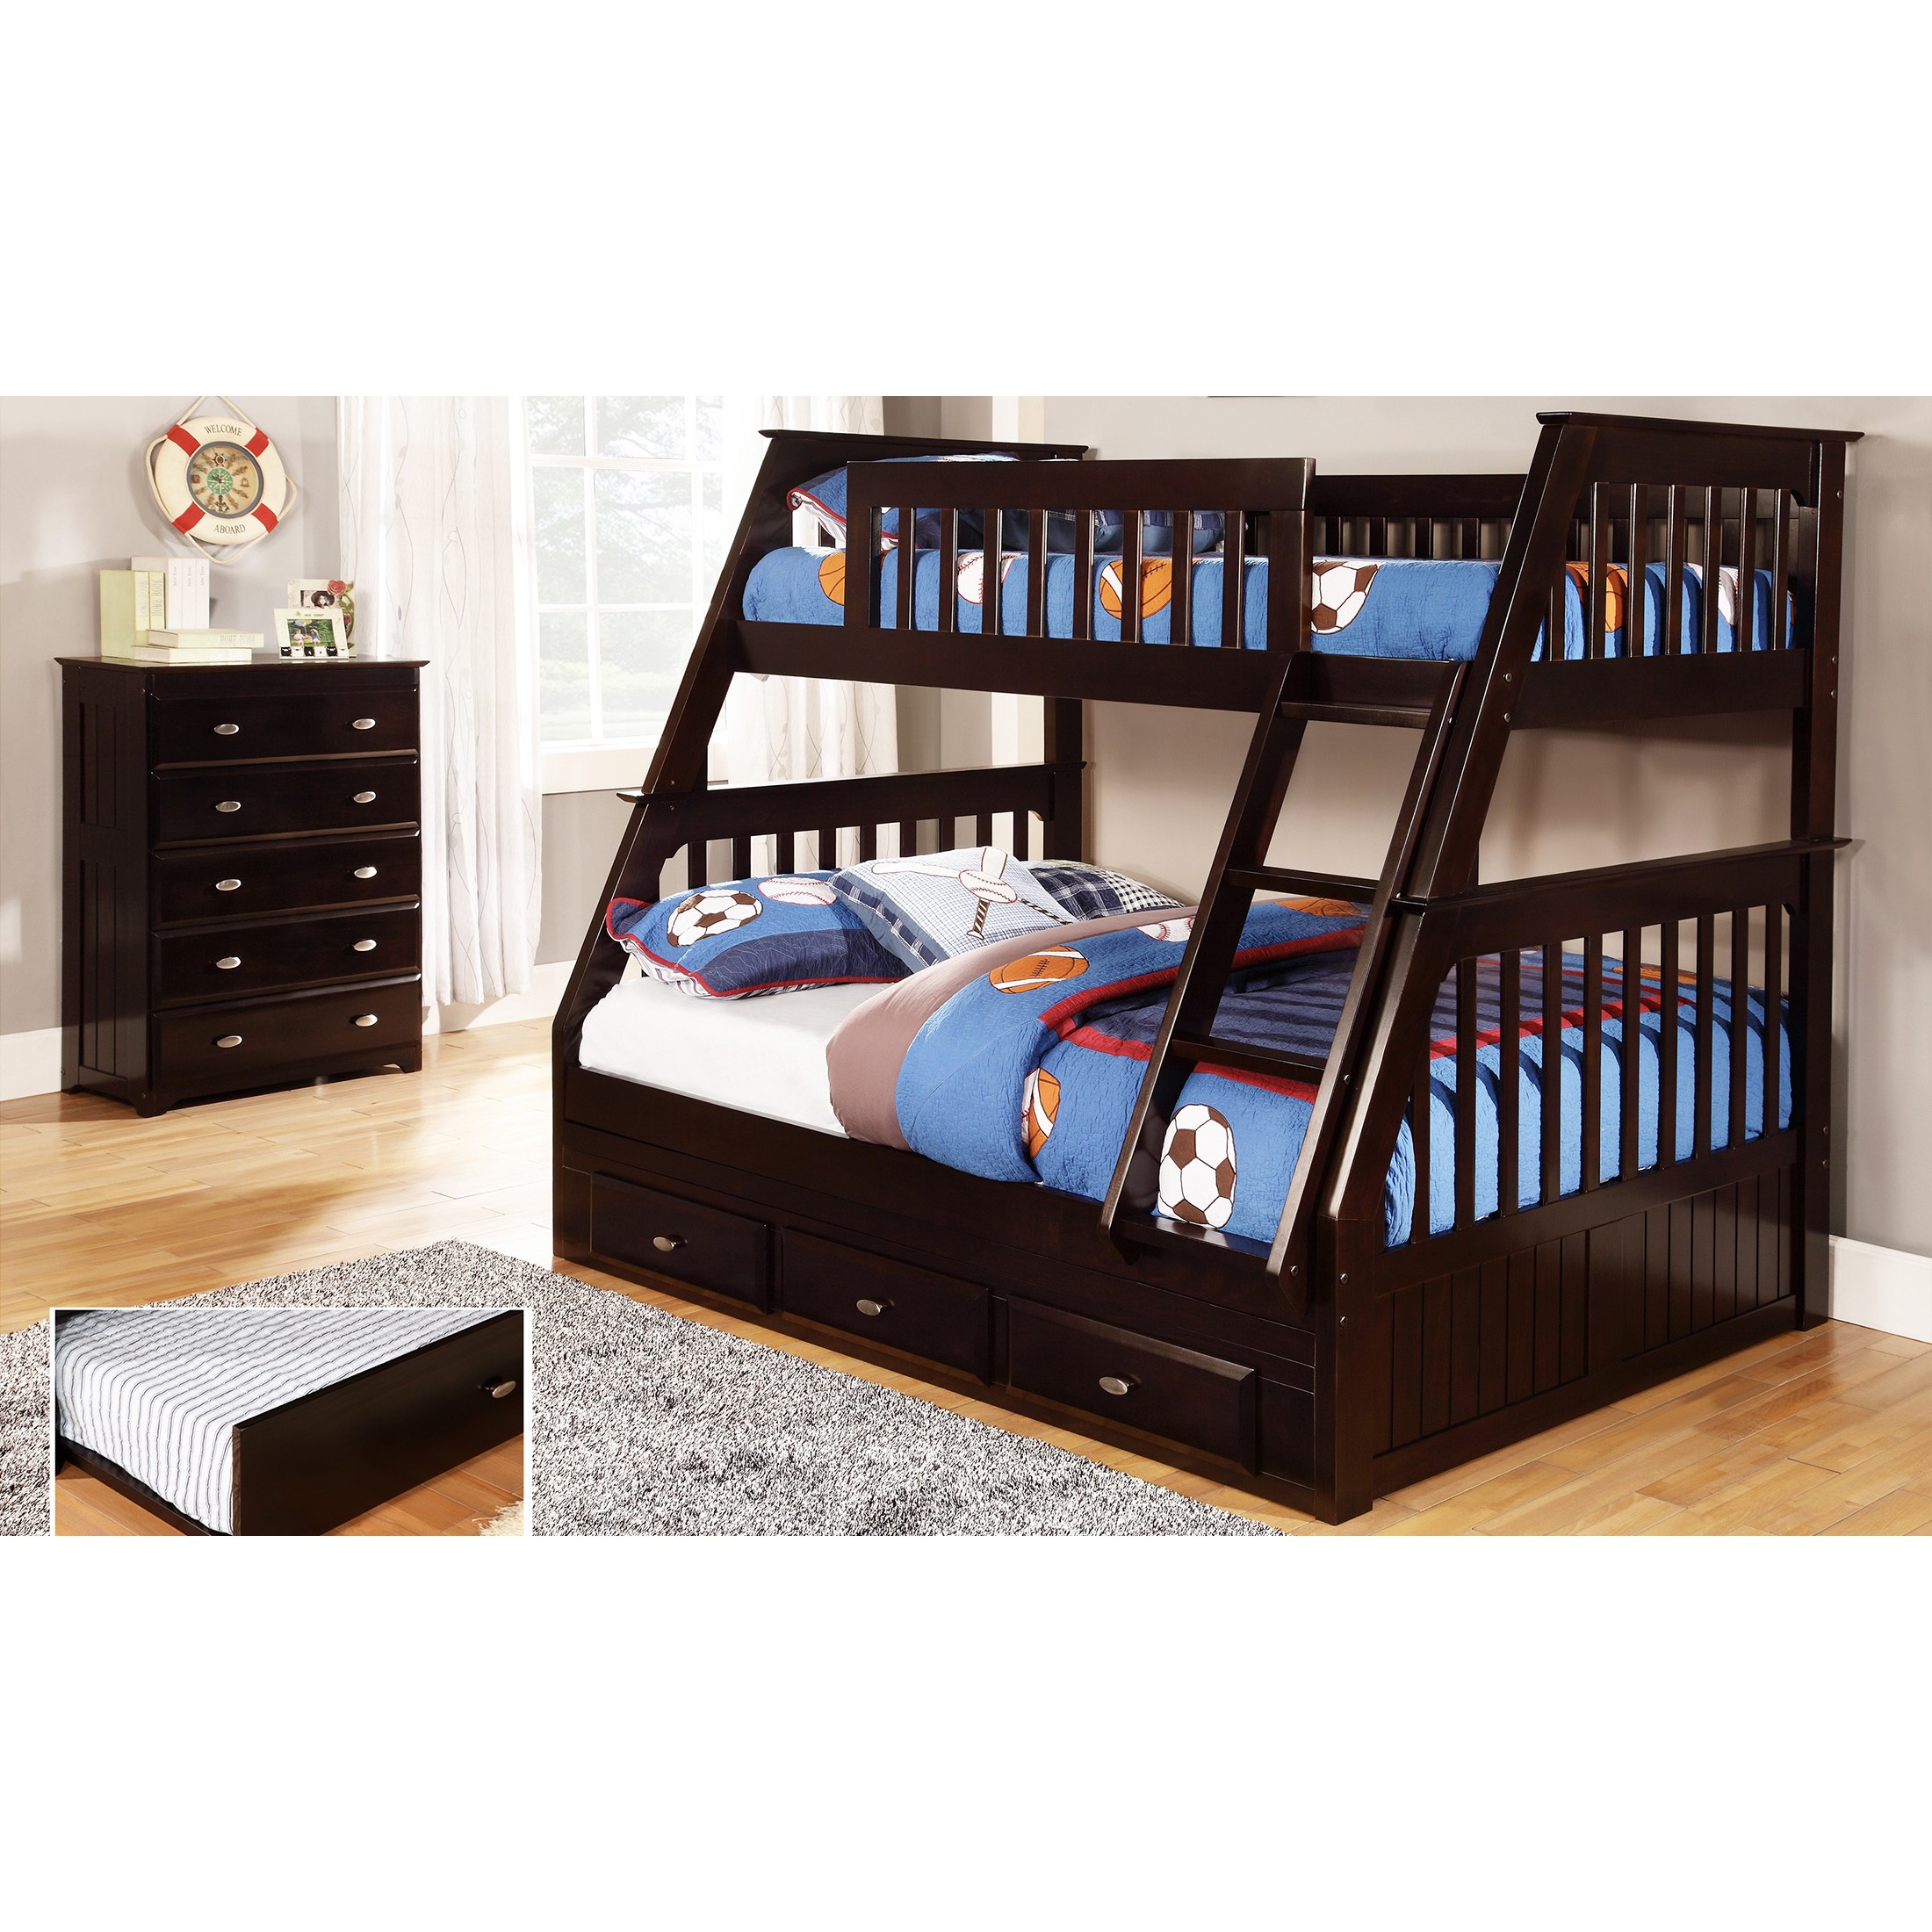 Bunk Beds Expresso Twin Over Full Mission Bunk Bed Discover World Furniture DIFMLKC